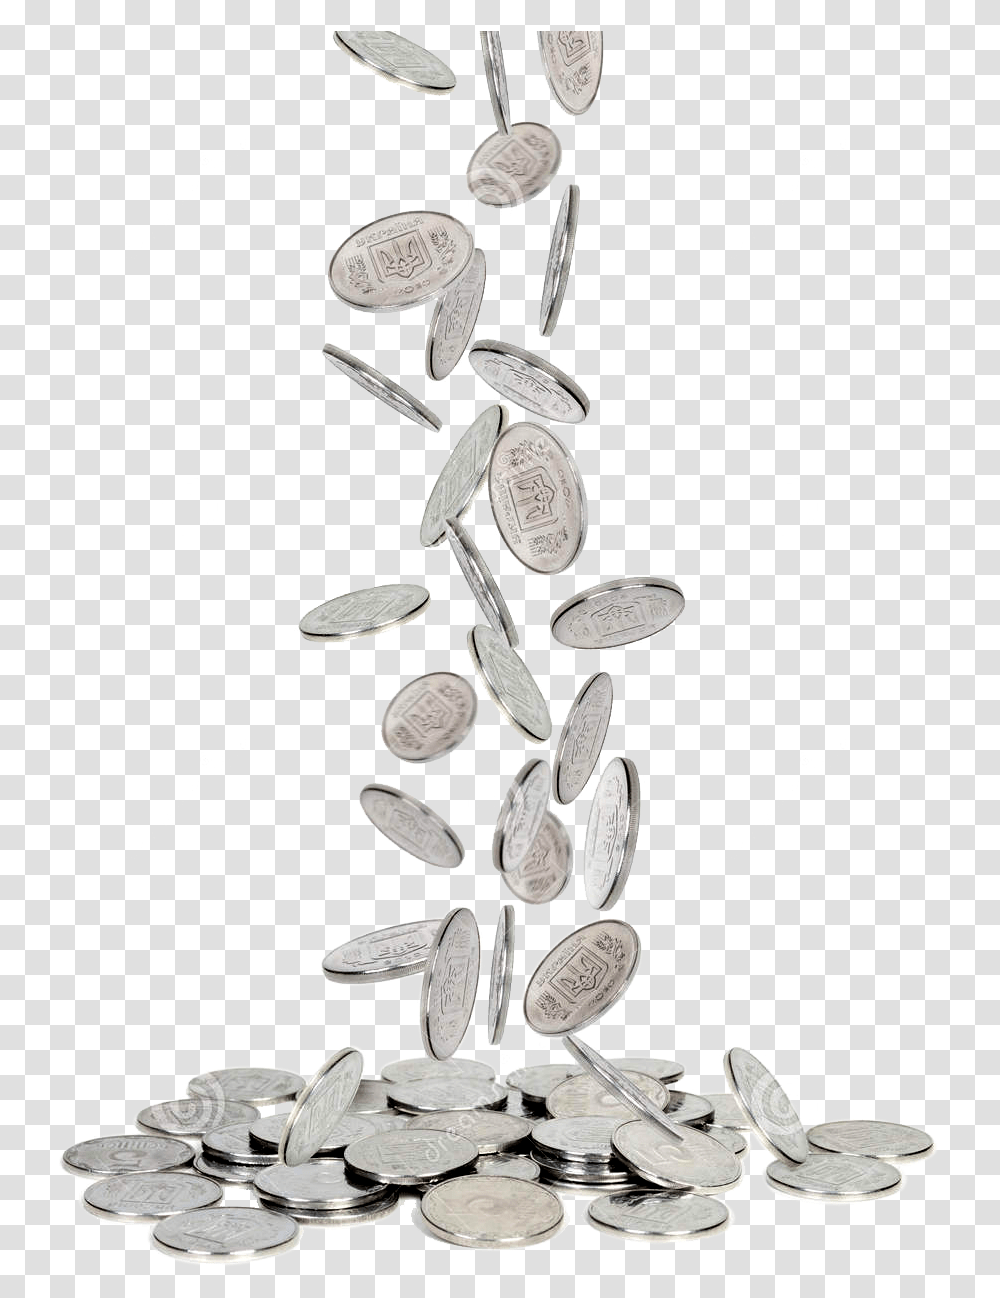 Silver Coins Falling Coins Falling Background, Plant, Vegetable, Food, Grain Transparent Png